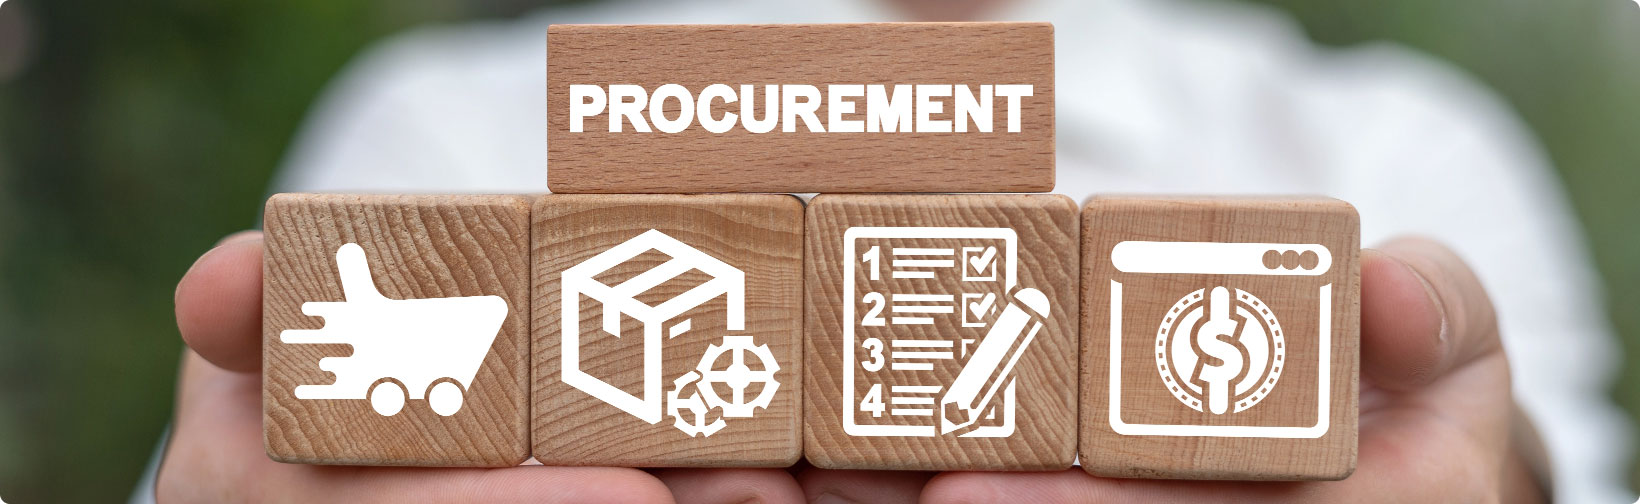 Optimal Timing for RFP Issuance in Procurement